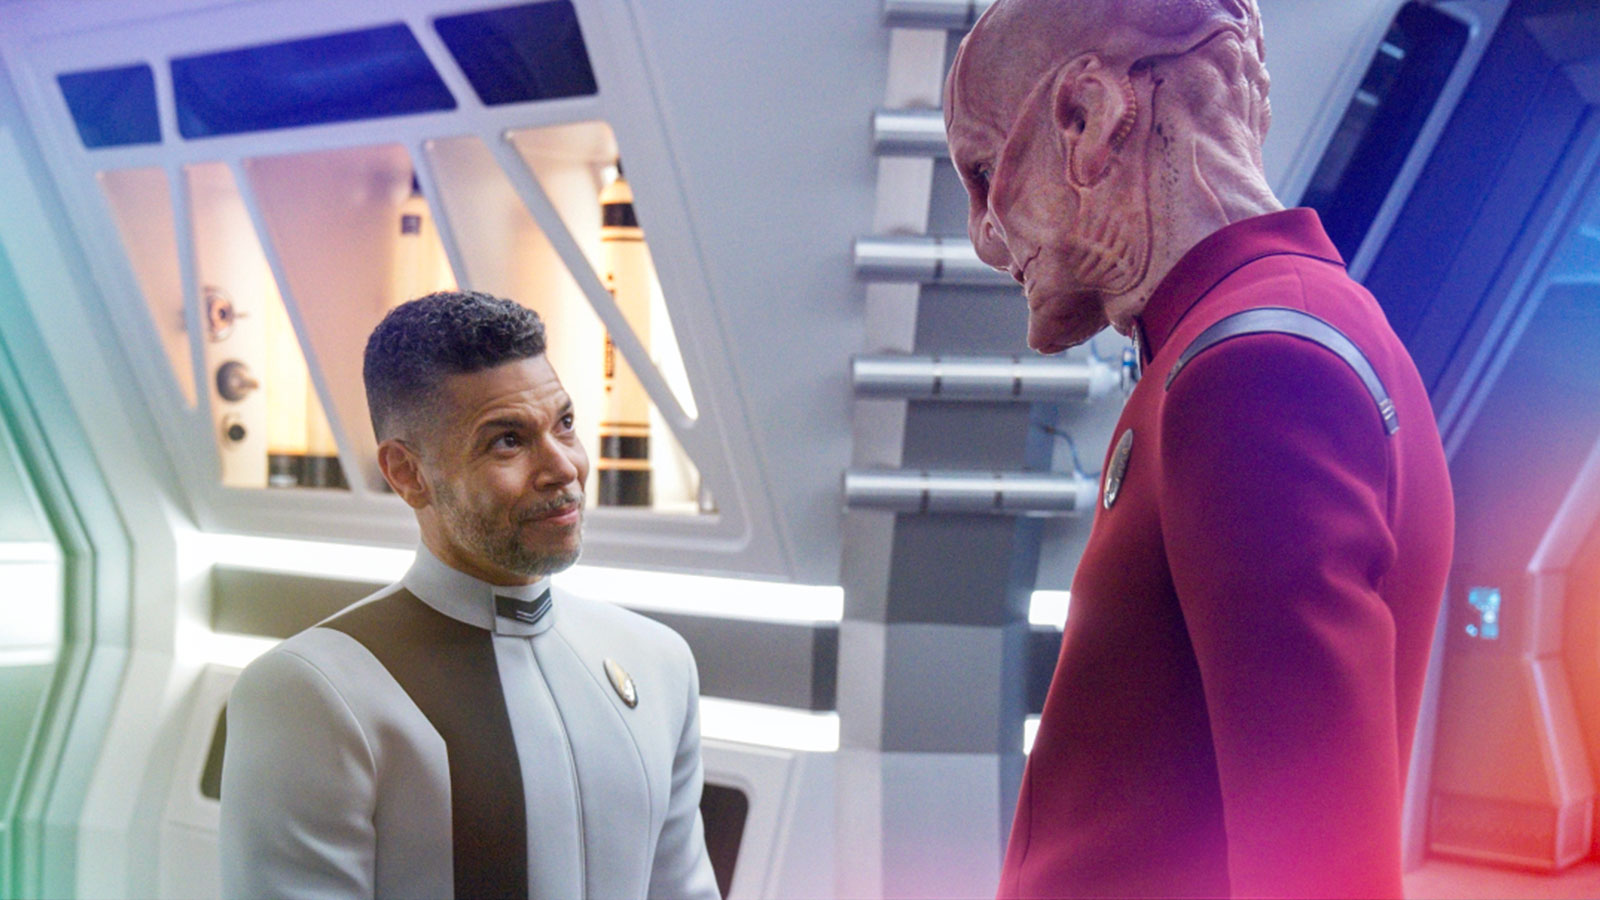 Star Trek: Discovery Episode 410 “The Galactic Barrier,” Preview + New Photos